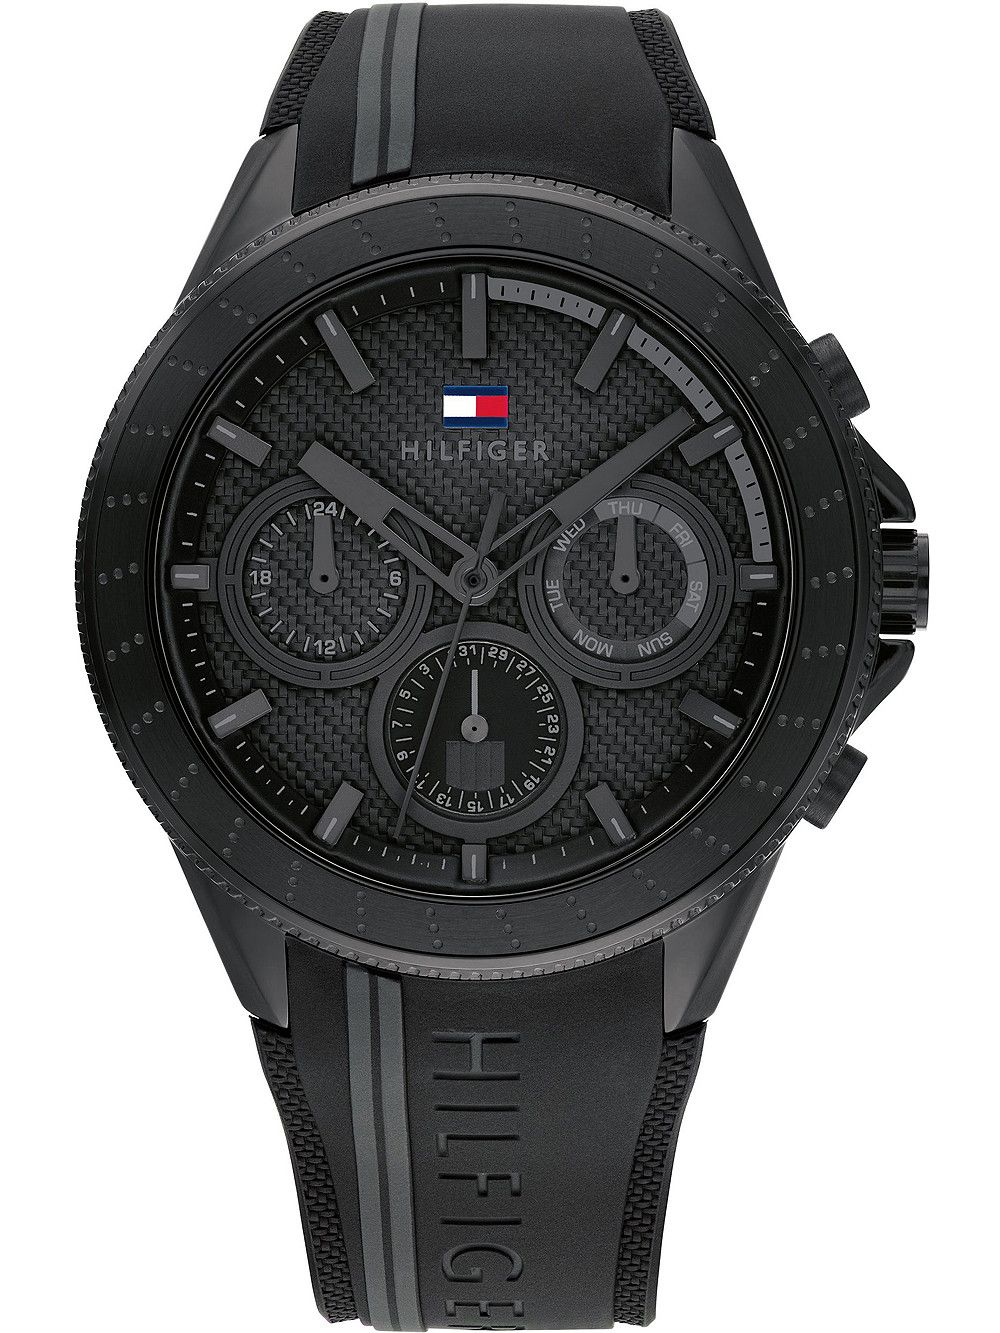 This Tommy Hilfiger Aiden Multi Dial Watch for Men is the perfect timepiece to wear or to gift. It's Black 44 mm Round case combined with the comfortable Black Silicone will ensure you enjoy this stunning timepiece without any compromise. Operated by a high quality Quartz movement and water resistant to 5 bars, your watch will keep ticking. Thanks to its ultra-soft silicone strap and its iridescent dial, it will bring a fashionable and modern touch to all your outfits!The choice is yours! -The watch has a calendar function: Day-Date, 24-hour Display High quality 21 cm length and 24 mm width Black Silicone strap with a Buckle Case diameter: 44 mm,case thickness: 12 mm, case colour: Black and dial colour: Black